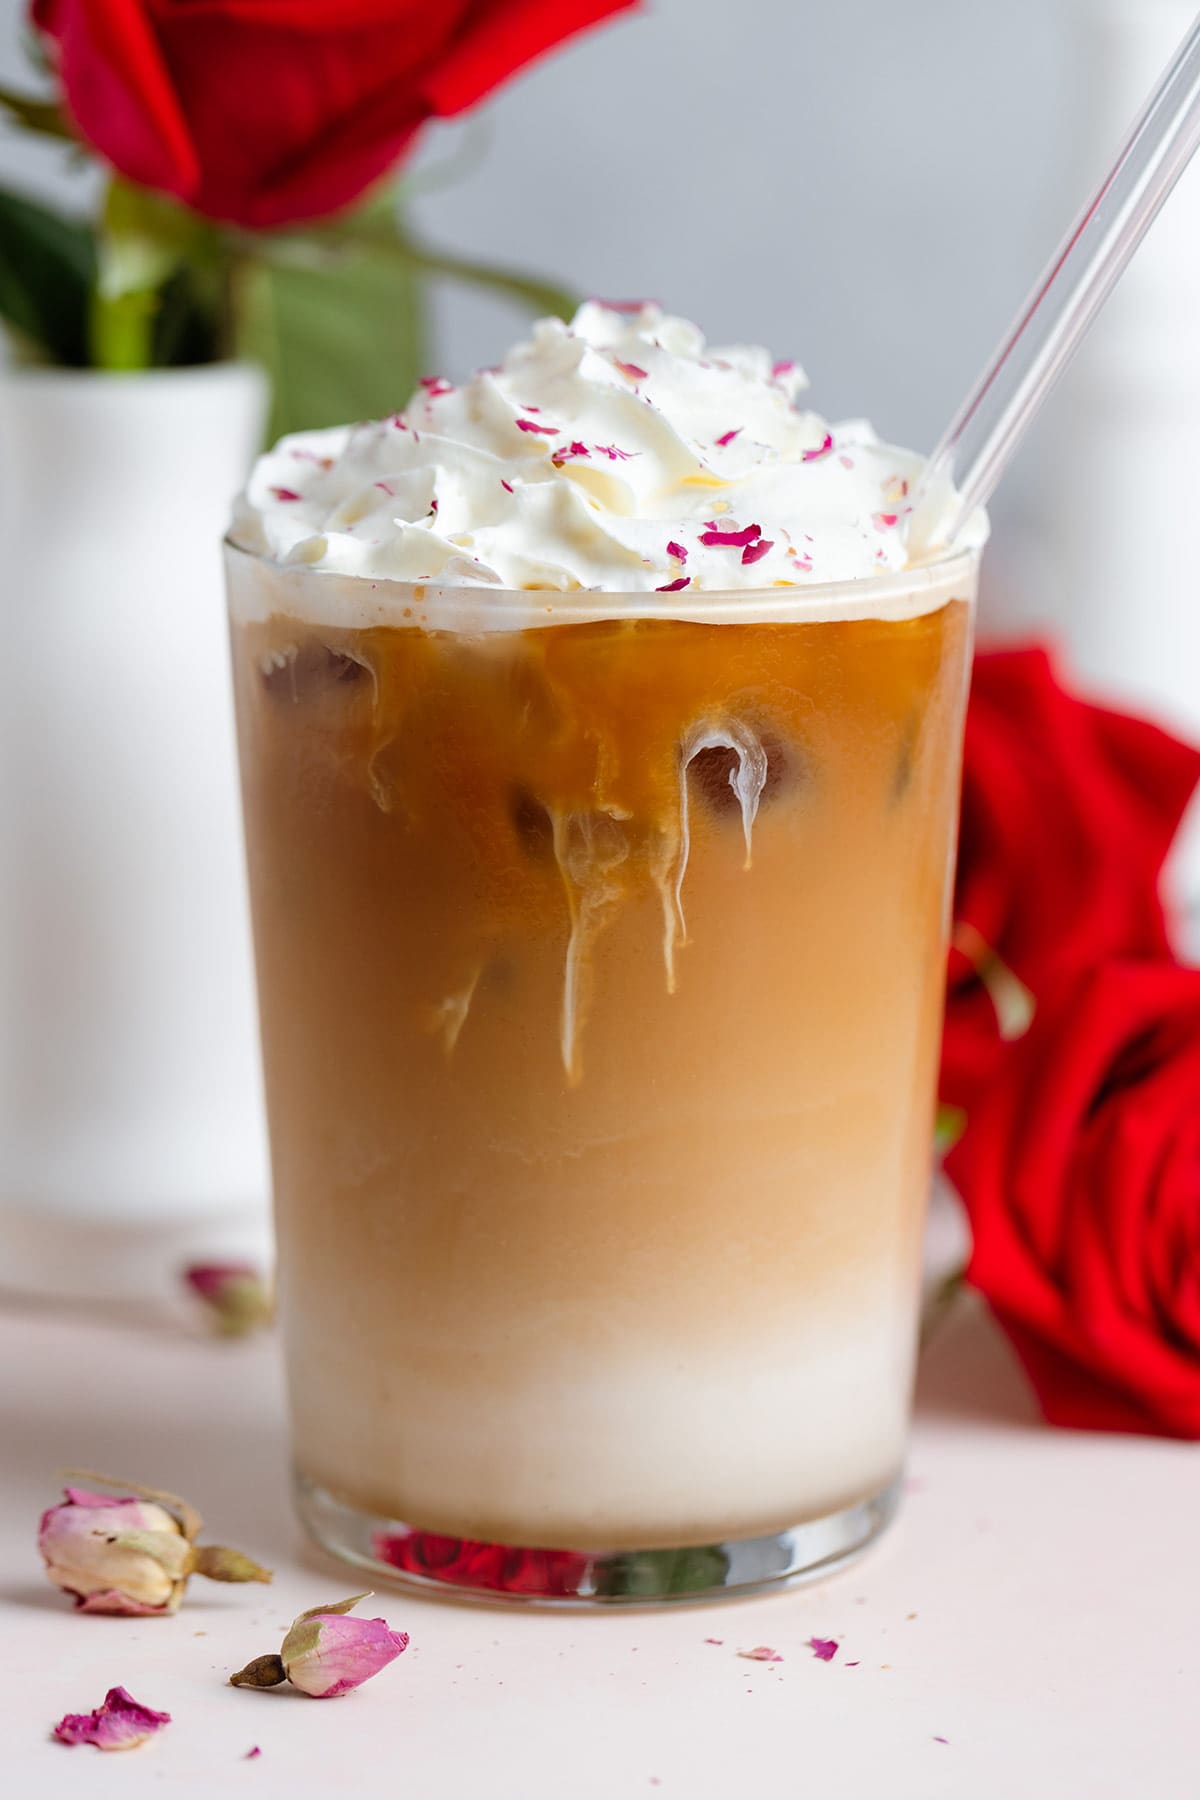 Iced latte with whipped cream and crushed dried rose petals sprinkled on top with a glass straw with red roses around the glass.